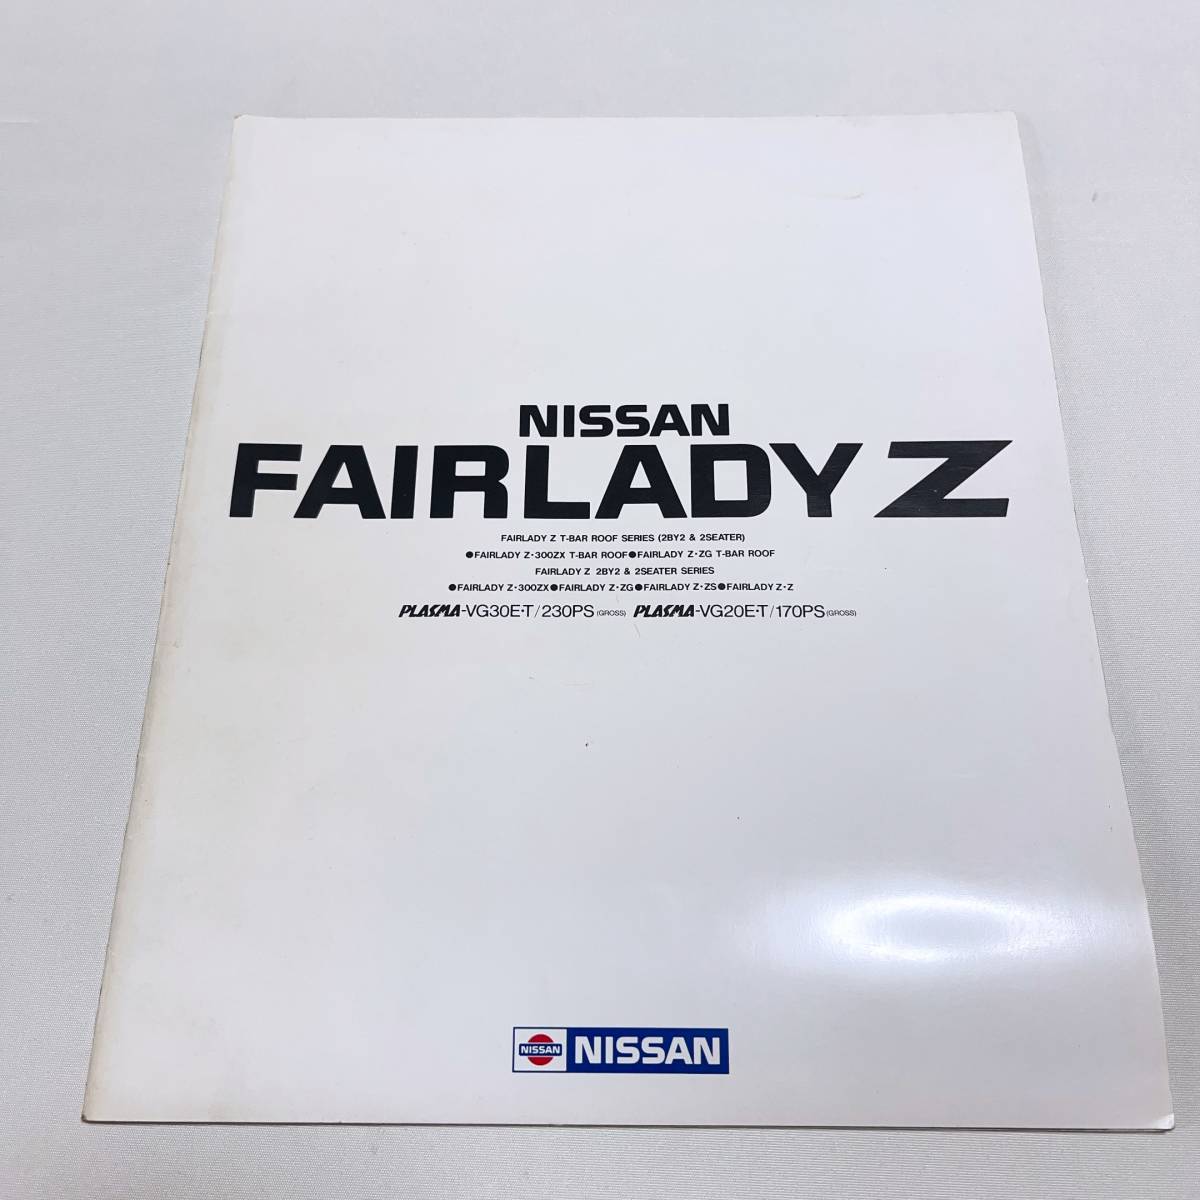  Fairlady Z 31 type catalog 36 page 60 year 10 month with price list . Fairlady Z 31